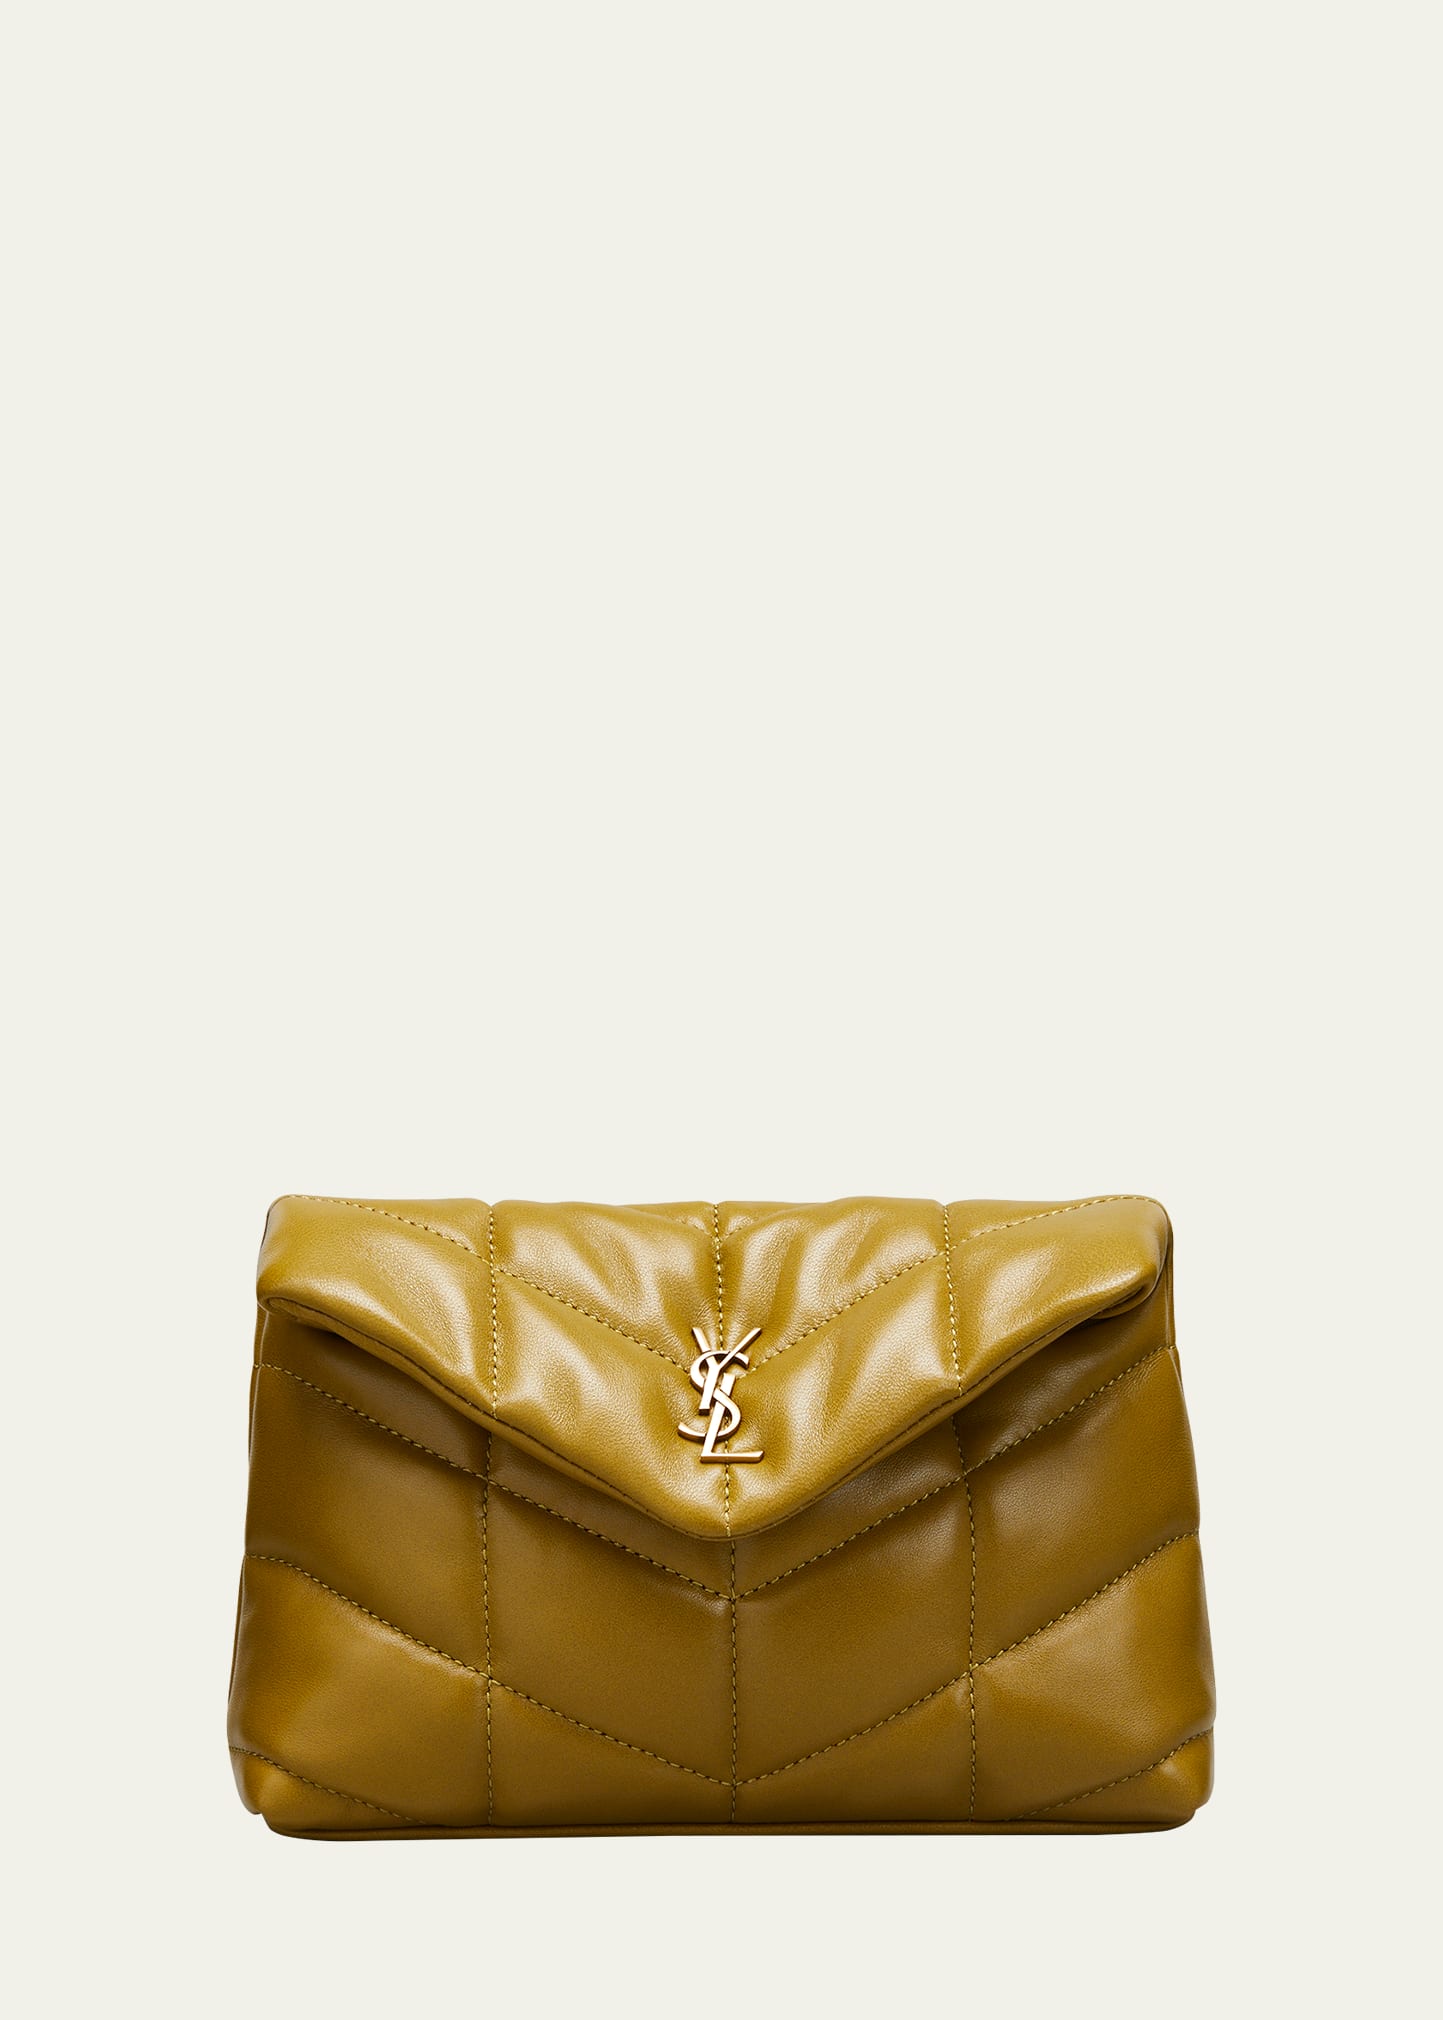 SAINT LAURENT PUFFER SMALL YSL QUILTED POUCH CLUTCH BAG